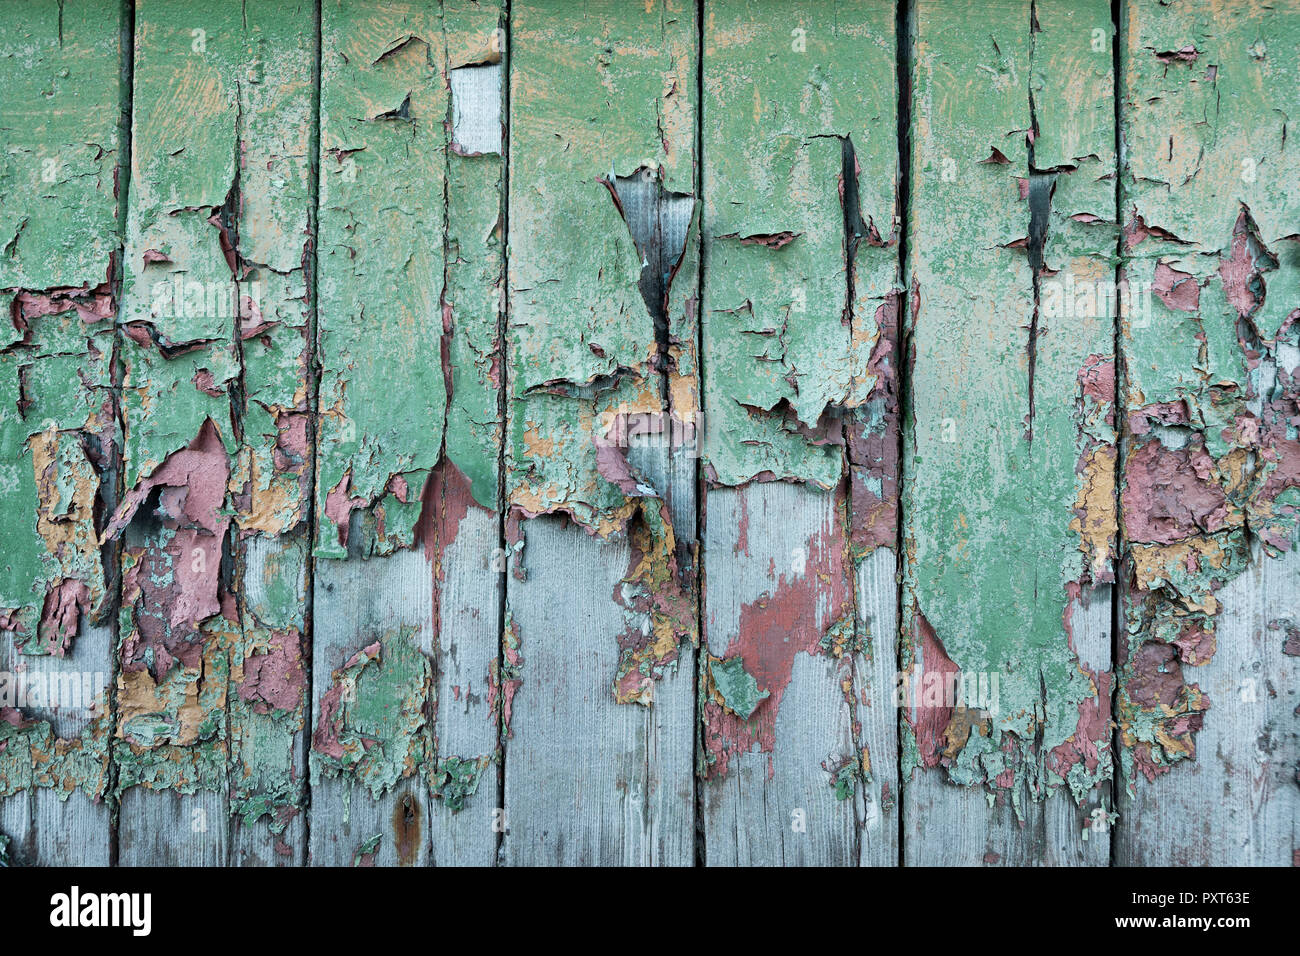 Peeling green and red paint on wooden wall, Russian miners settlement Barentsburg, Isfjorden, Spitsbergen Stock Photo